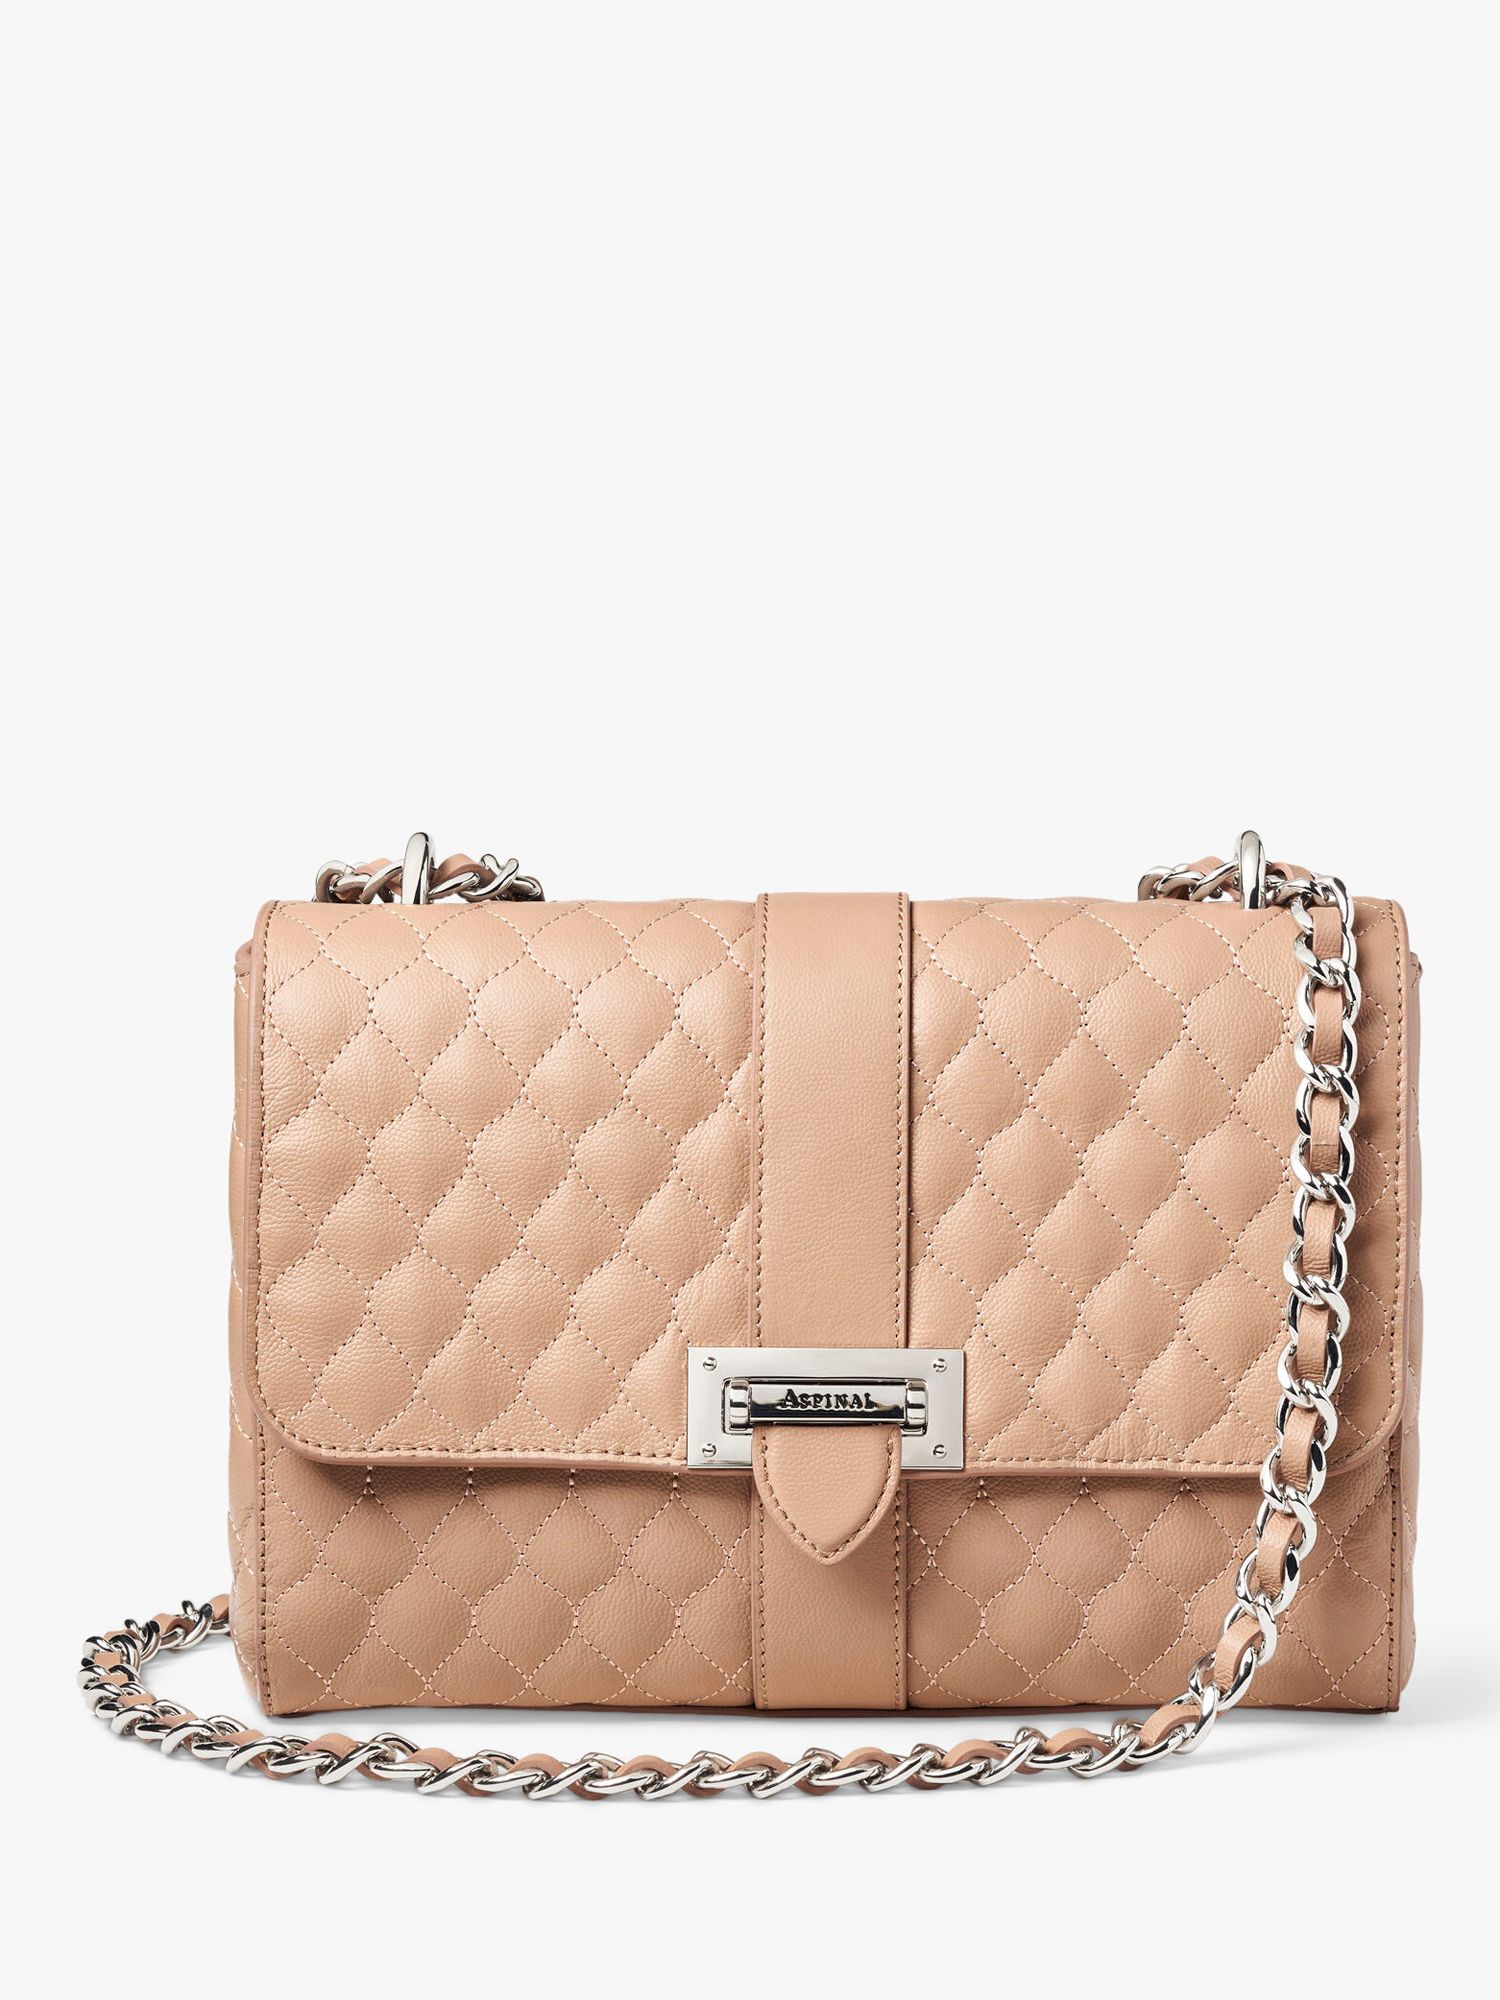 Chanel Pink Chevron-Quilted Calfskin Shoulder Bag by Ann's Fabulous Finds